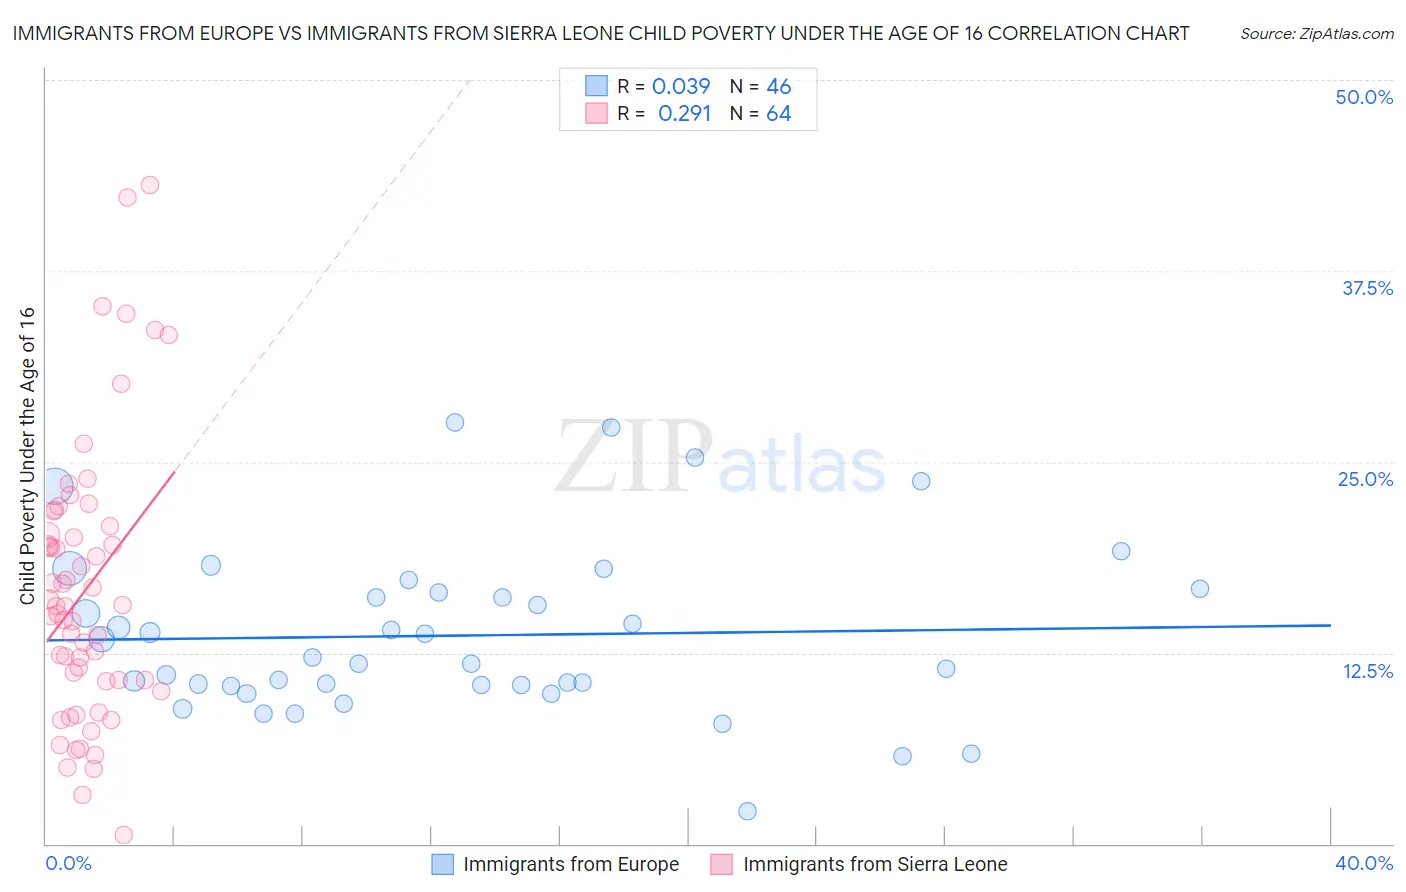 Immigrants from Europe vs Immigrants from Sierra Leone Child Poverty Under the Age of 16